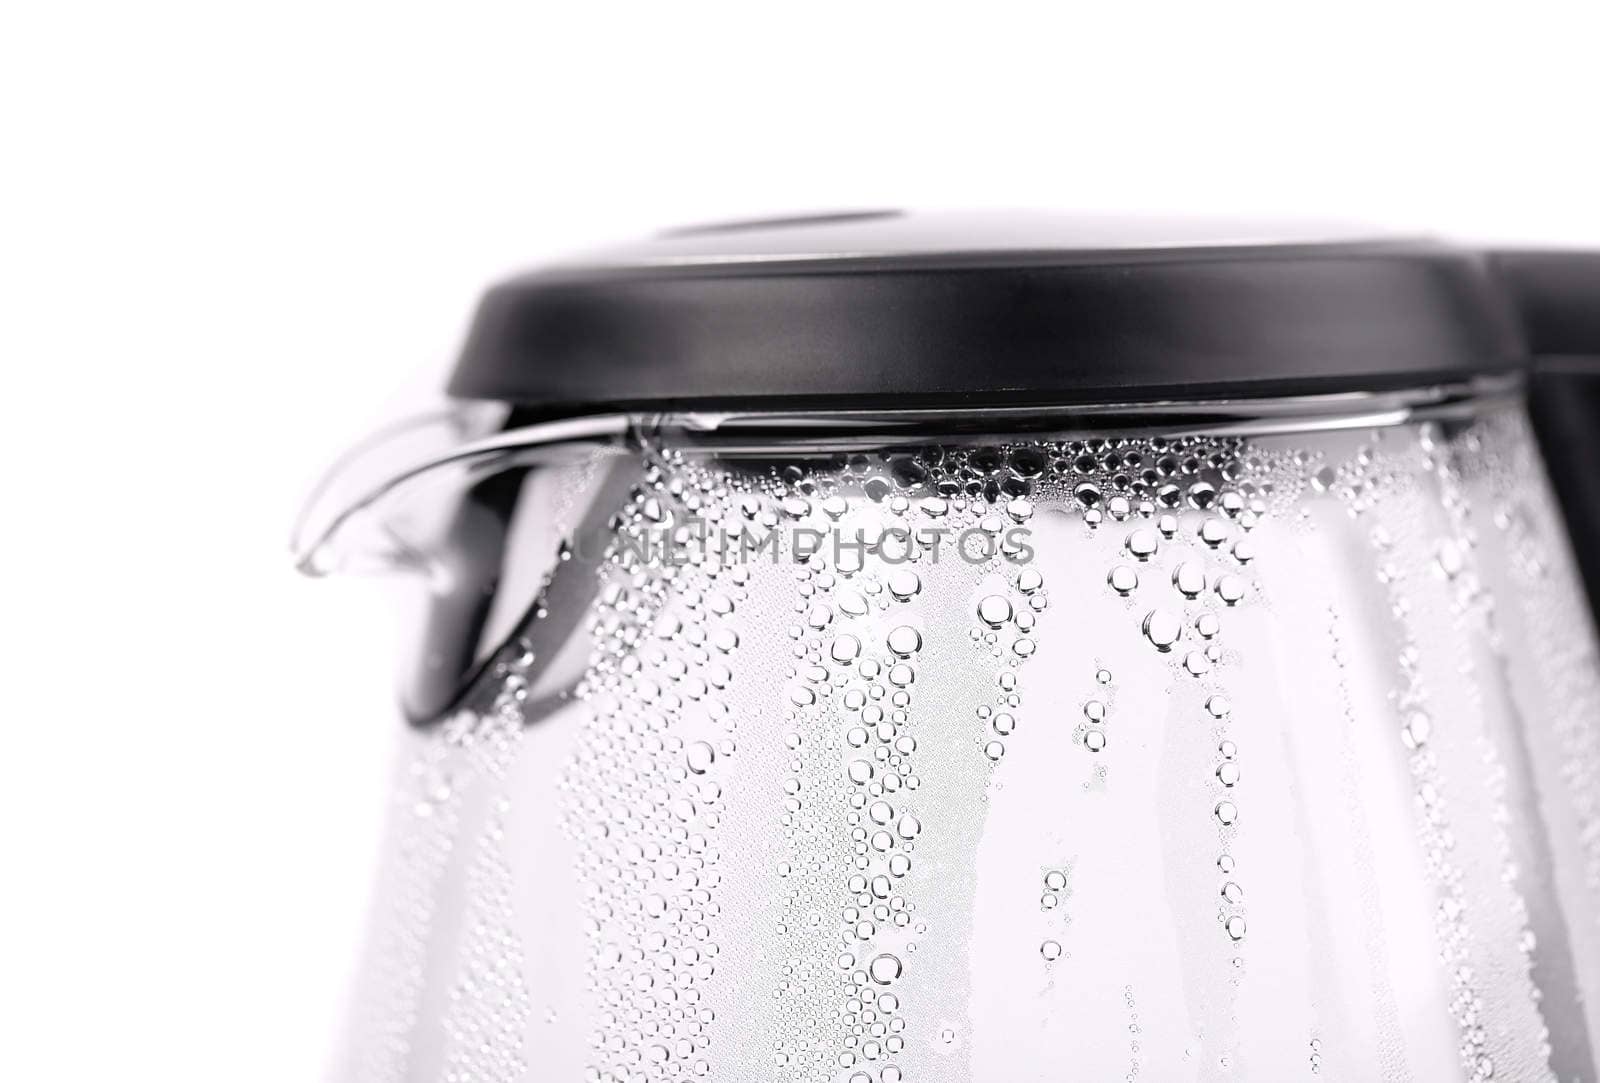 Water boiling in the glass electric kettle. by indigolotos